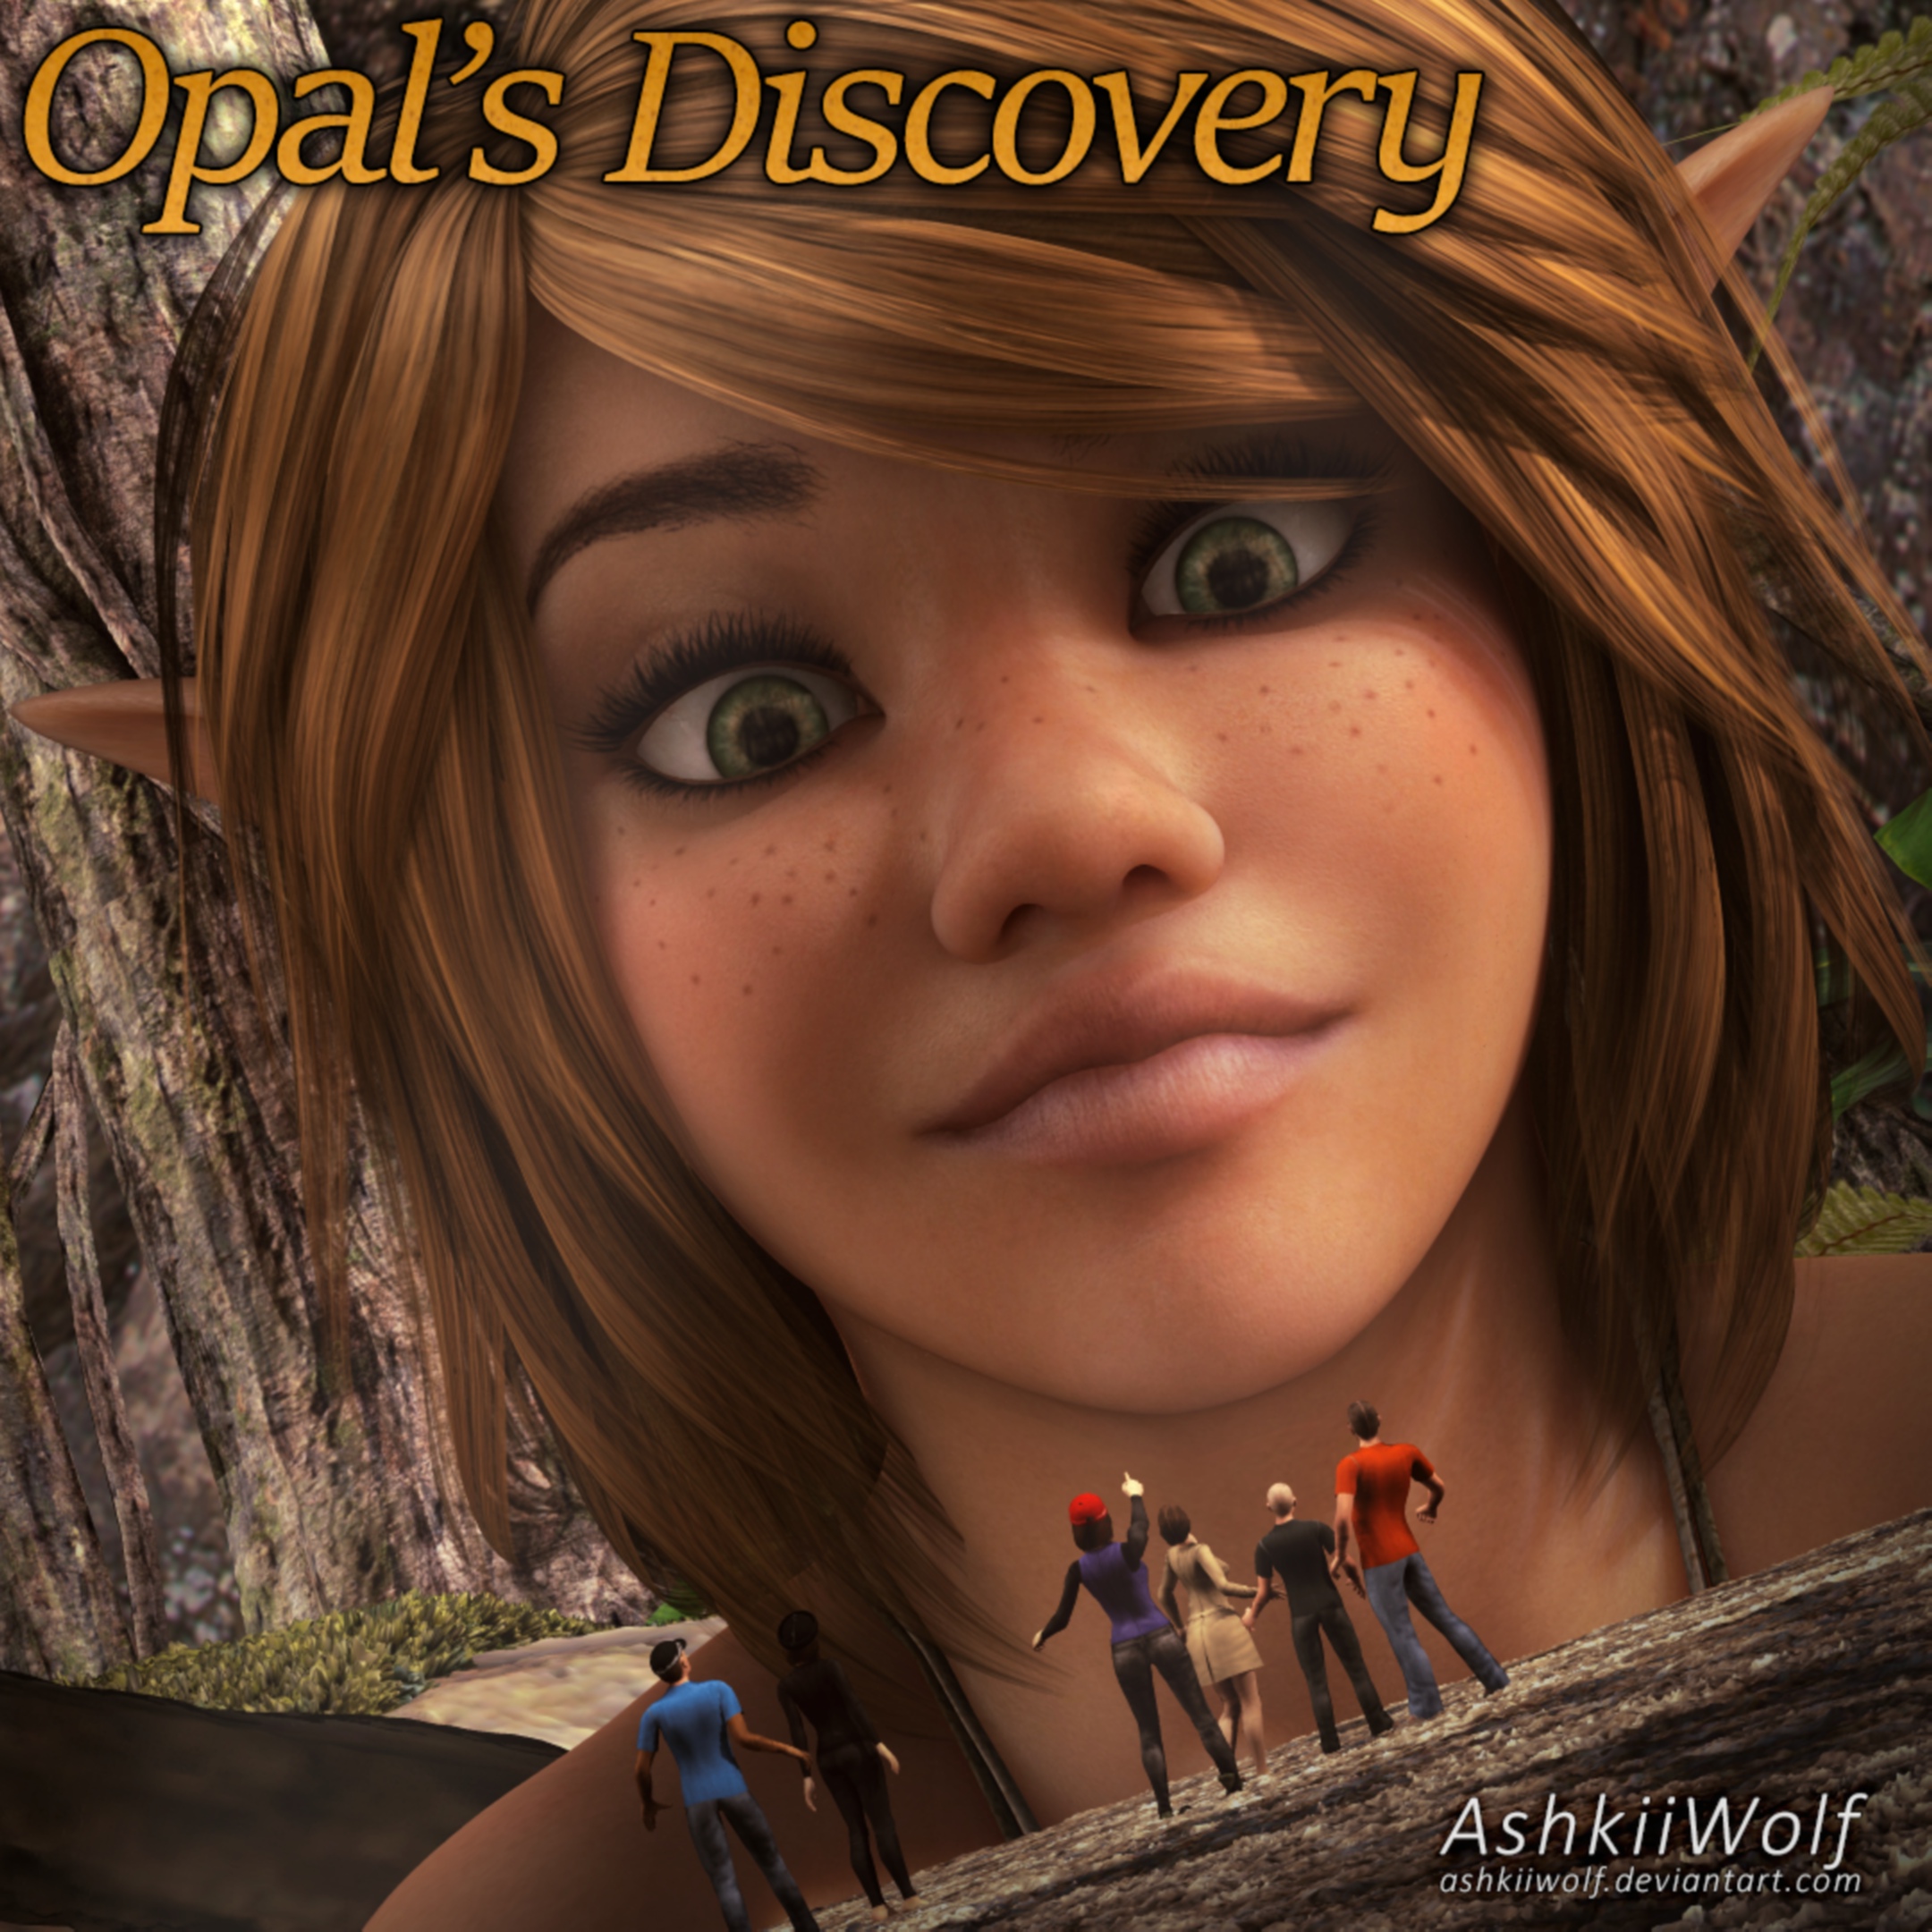 Giantess elf babe outdoors in AshkiiWolf Opals Discovery 3D Porn Comic